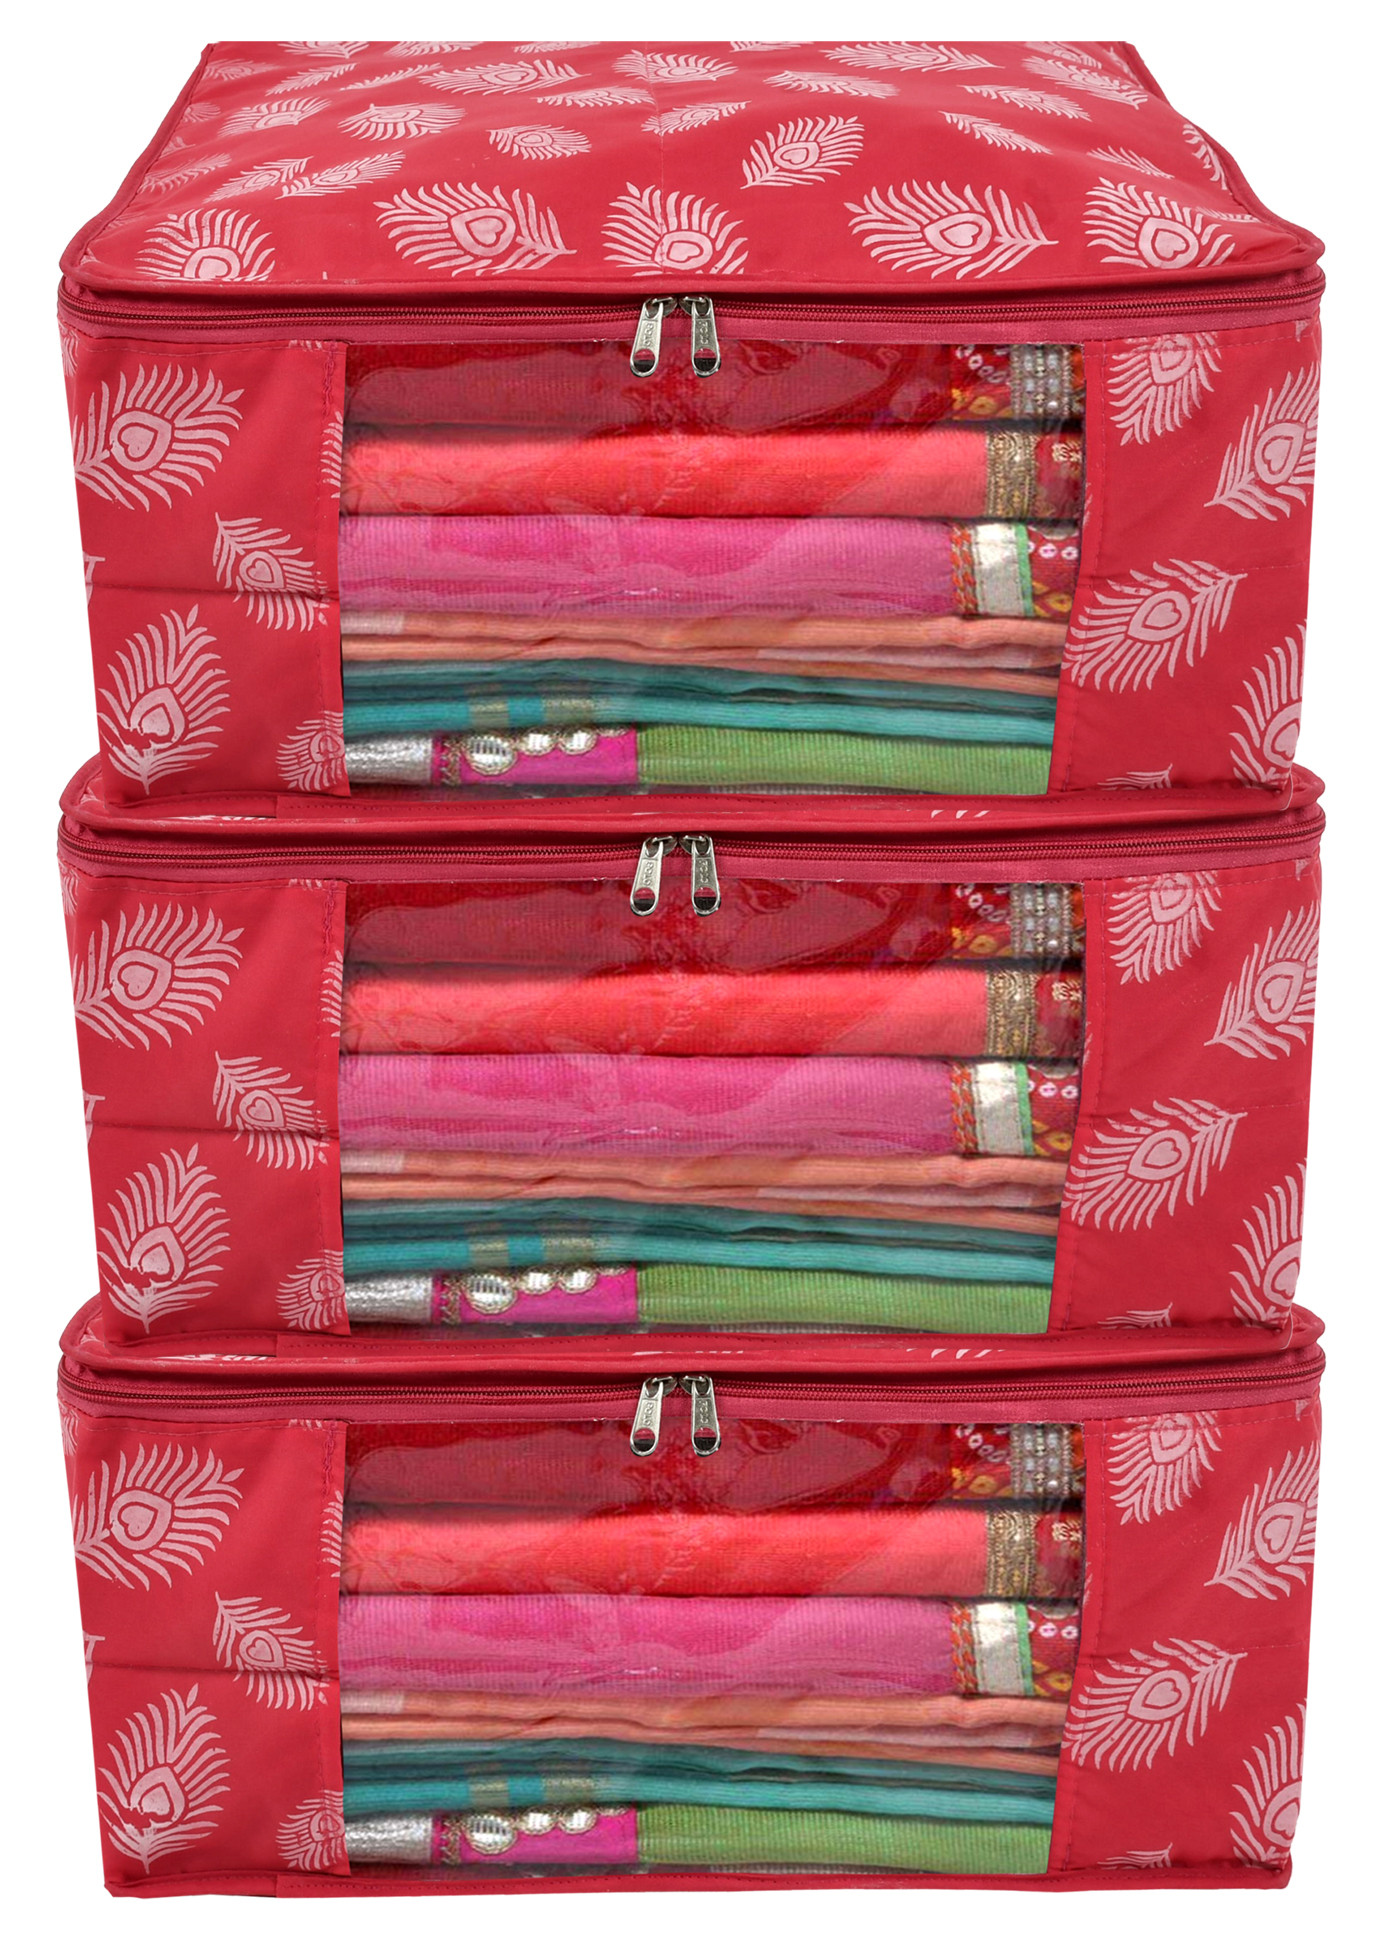 Kuber Industries Leaf Printed Saree Cover/Clothes Organiser For Wardrobe With Transparent Window,(Pink)